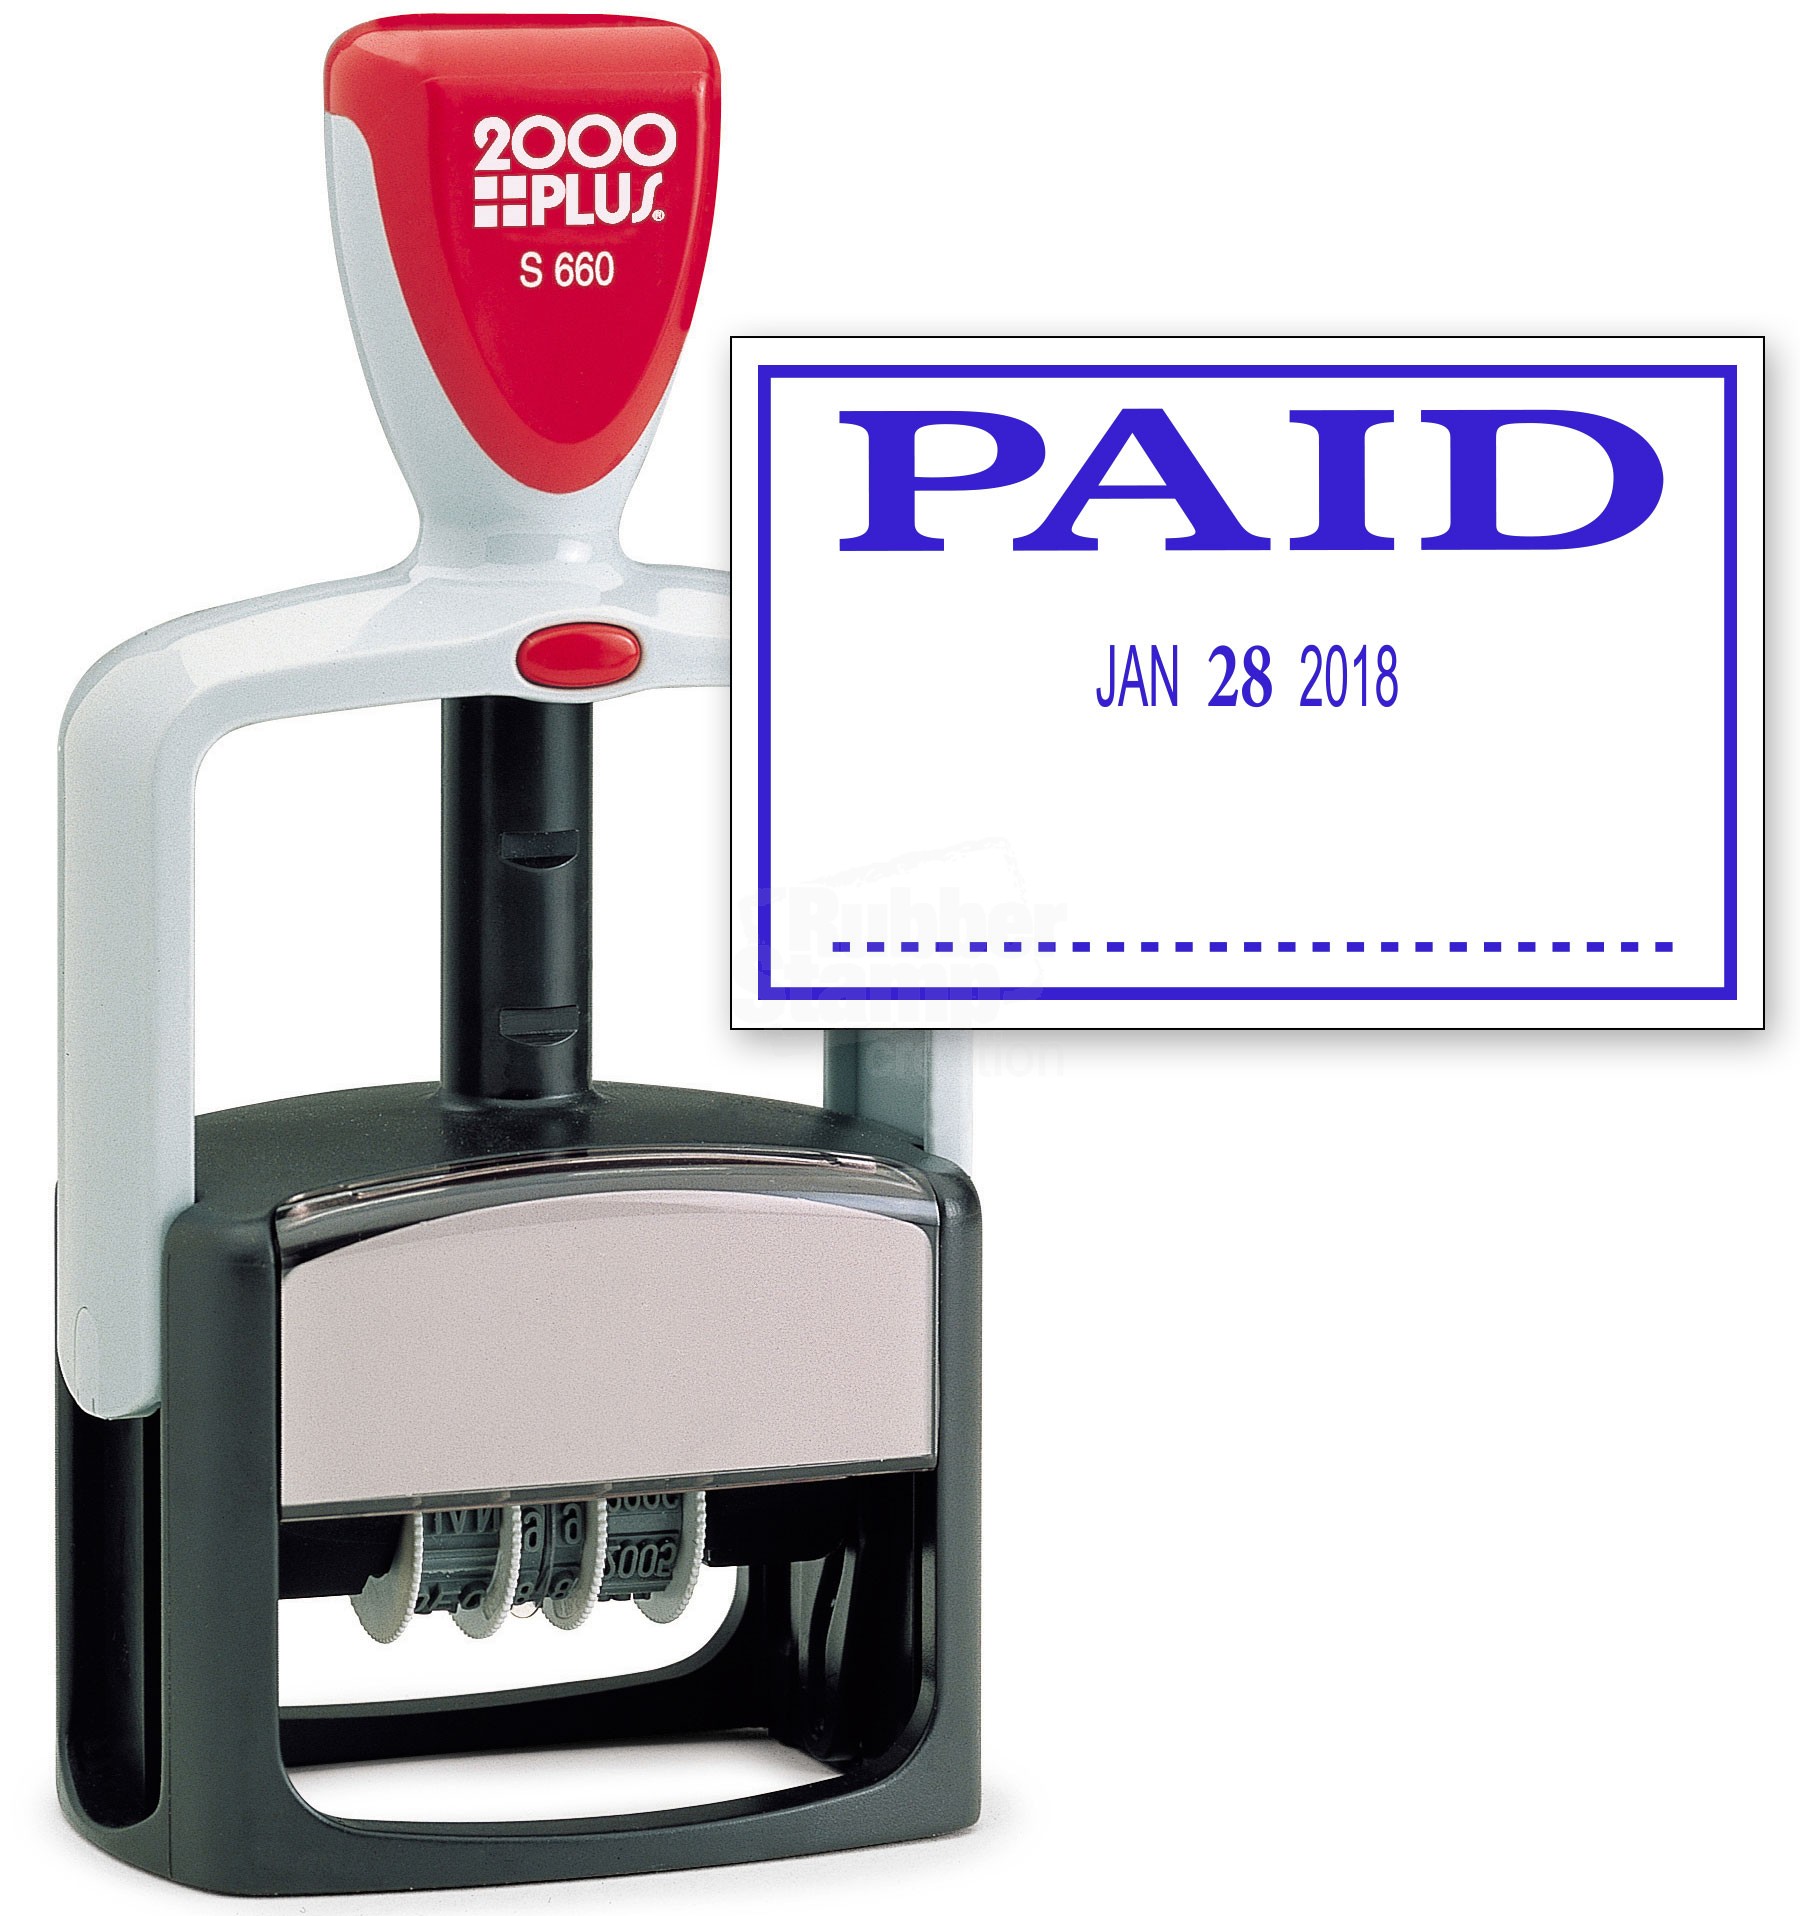 2000 PLUS Heavy Duty Style 2Color Date Stamp with PAID self inking